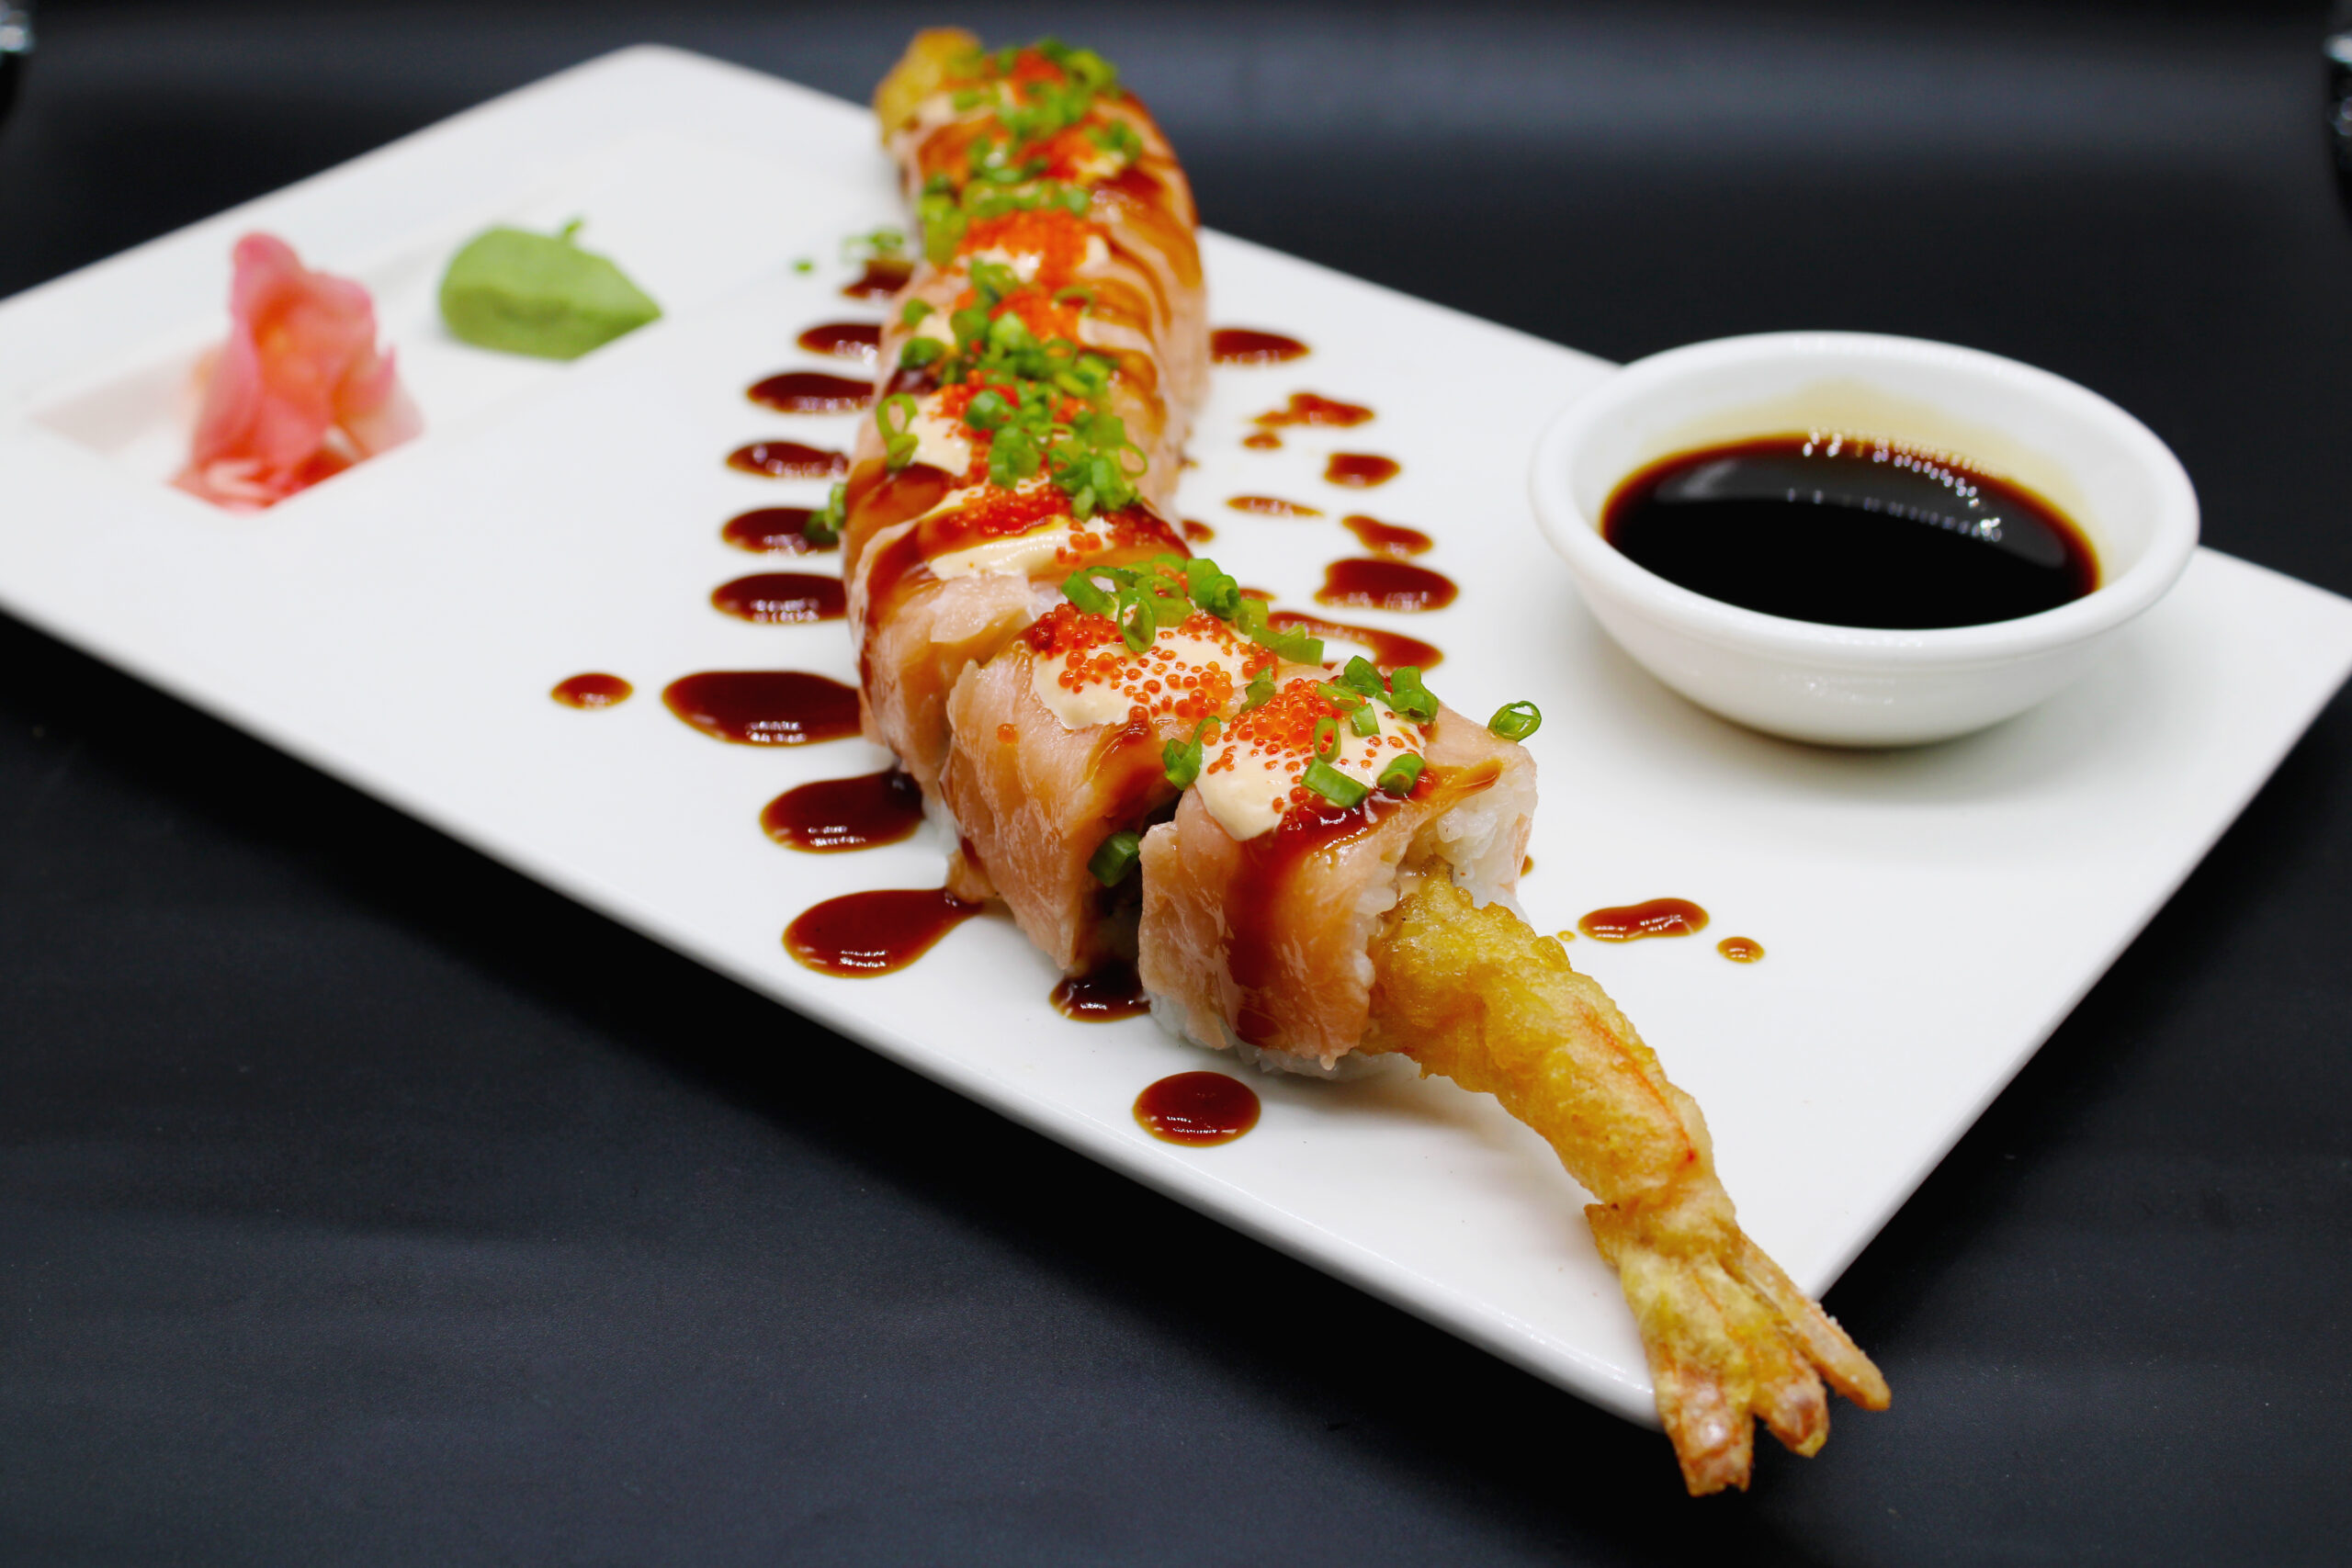 THE Park Chennai launches Six ‘O’ One for exclusive Dim Sums and Sushi